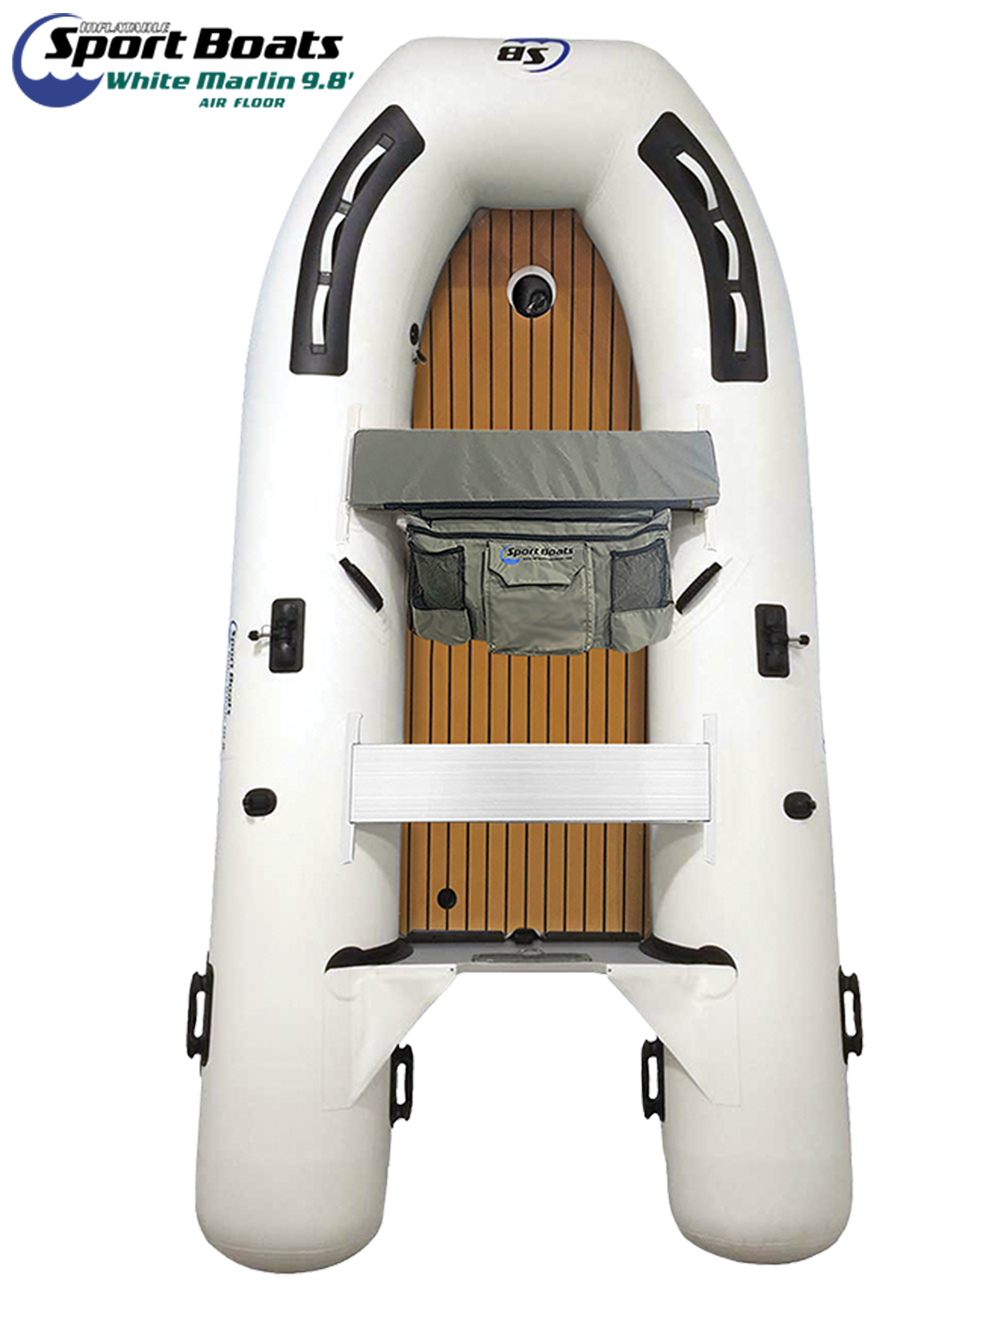 Inflatable Sport Boat - White Marlin 9.8' Air Floor Inflatable Dinghy